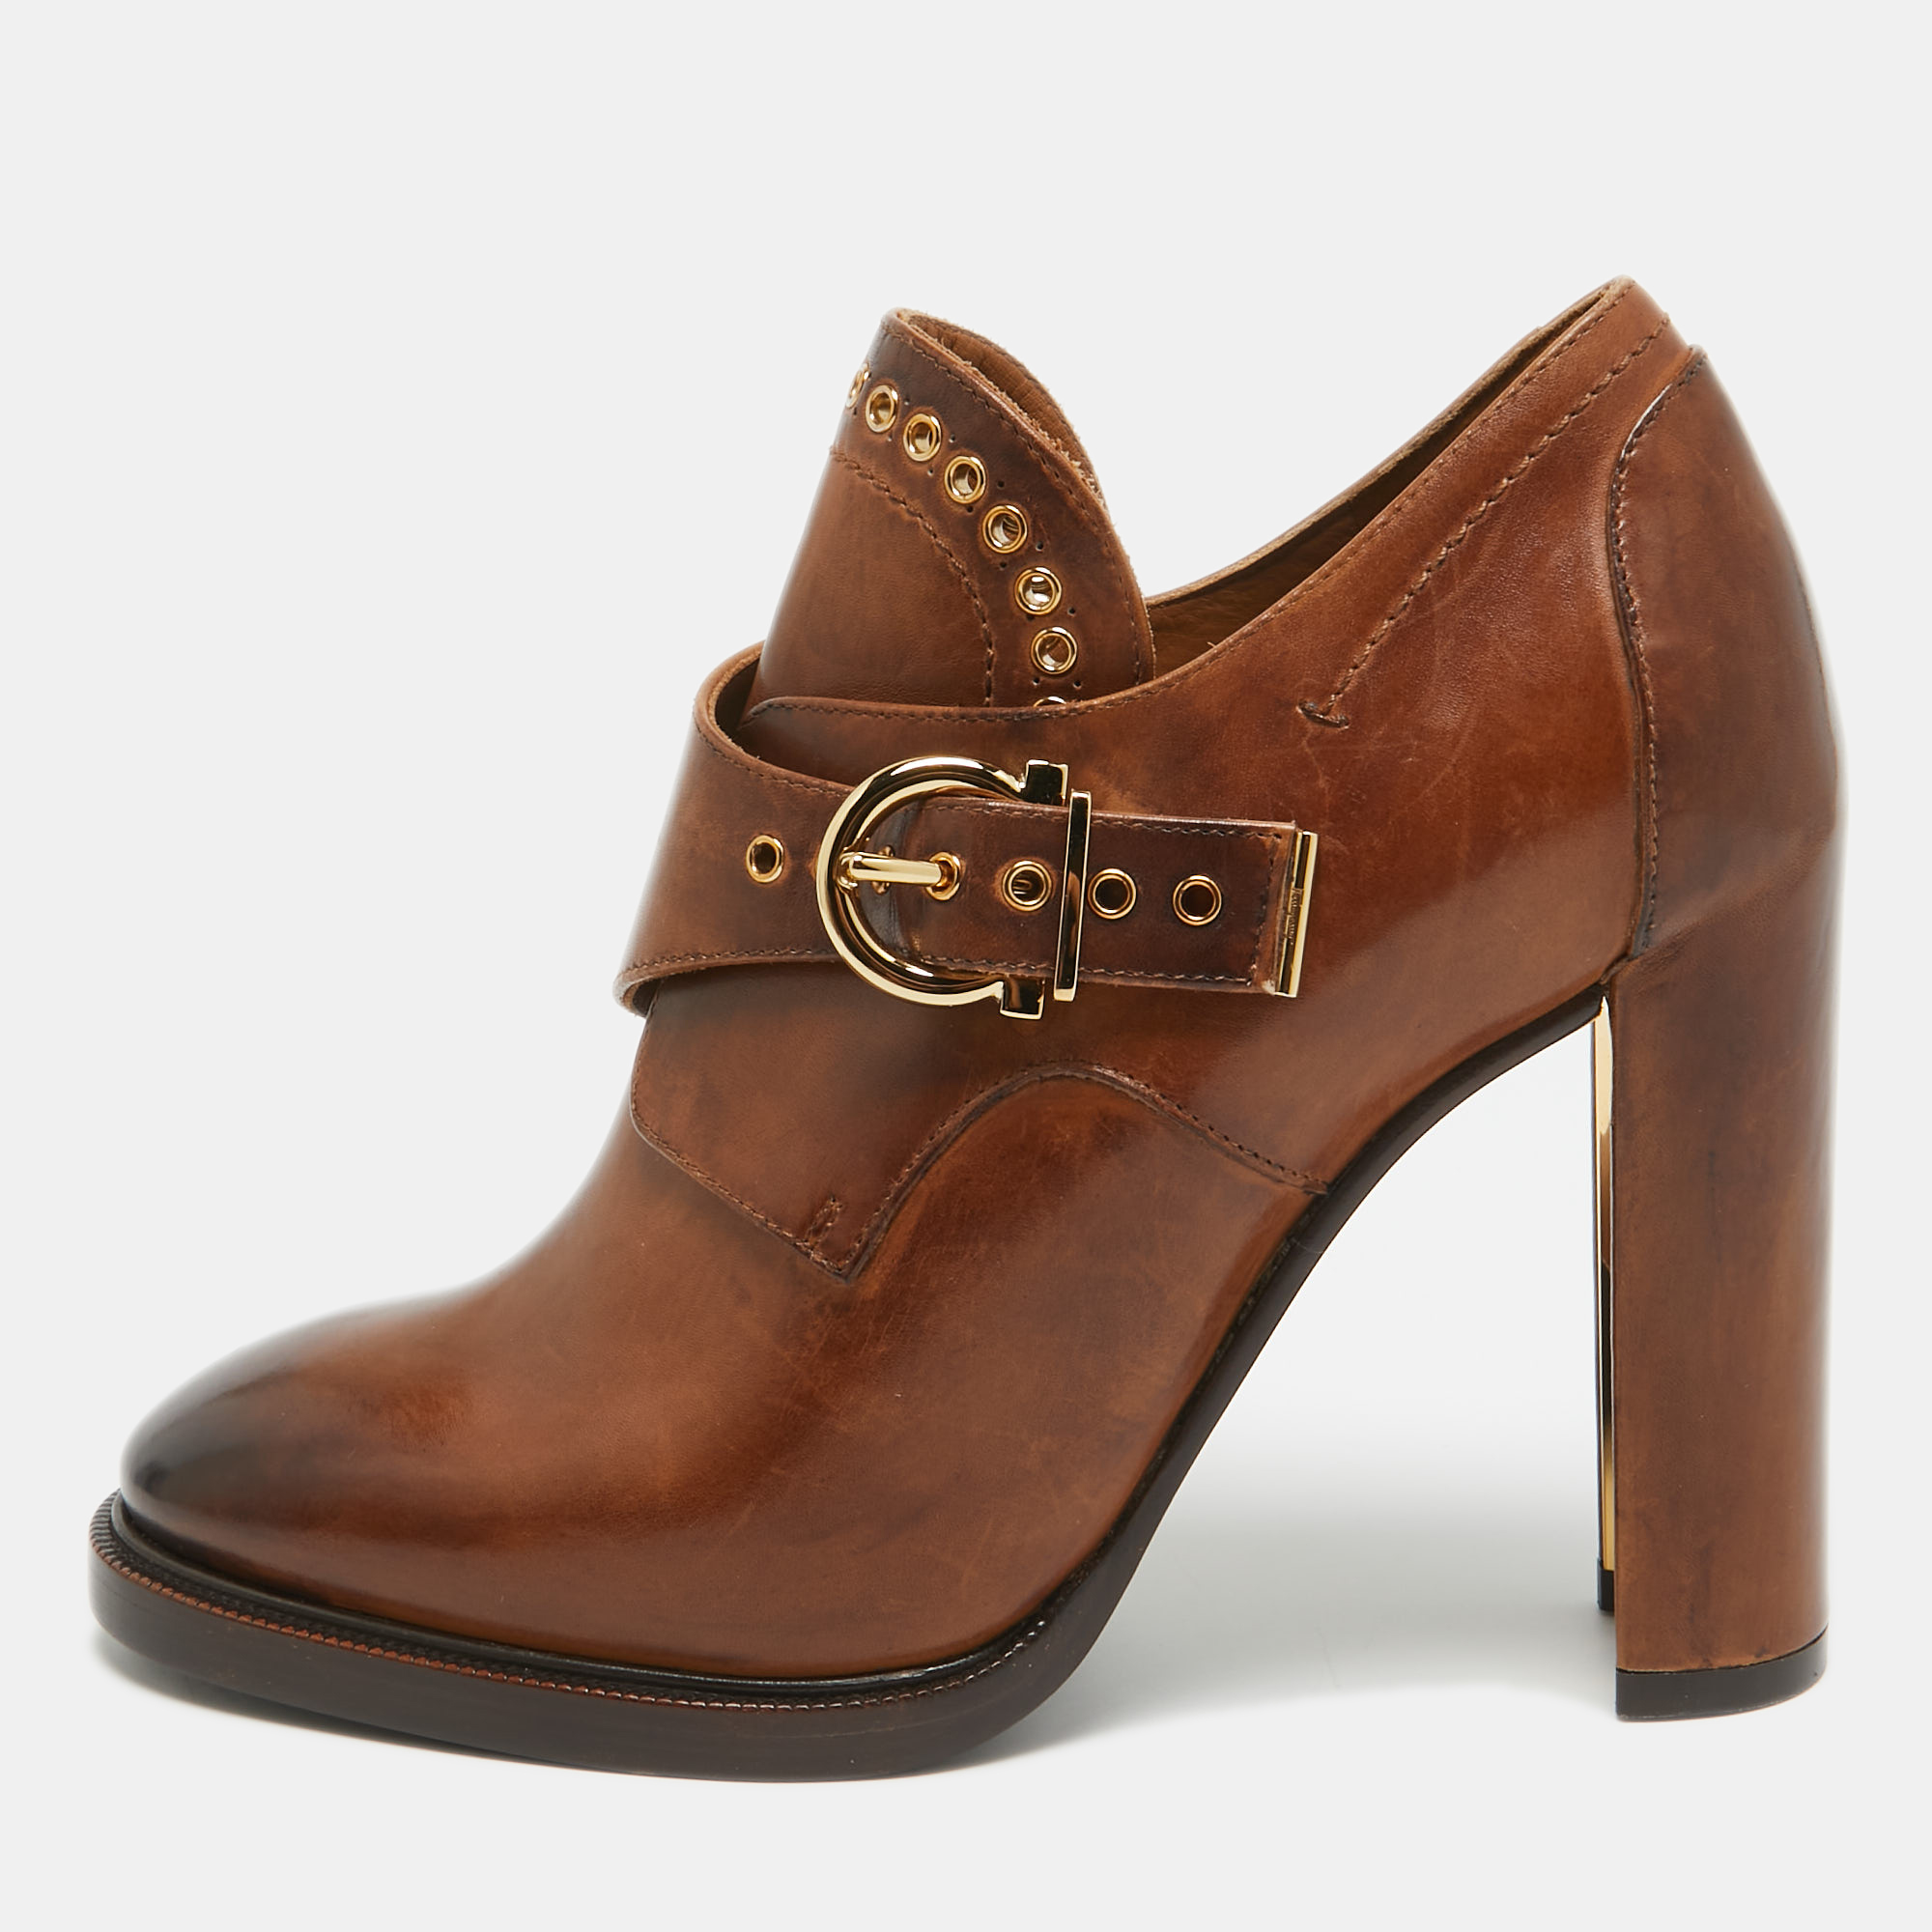 Pre-owned Ferragamo Brown Leather Nevers Eyelet Buckle Detail Ankle Booties Size 39